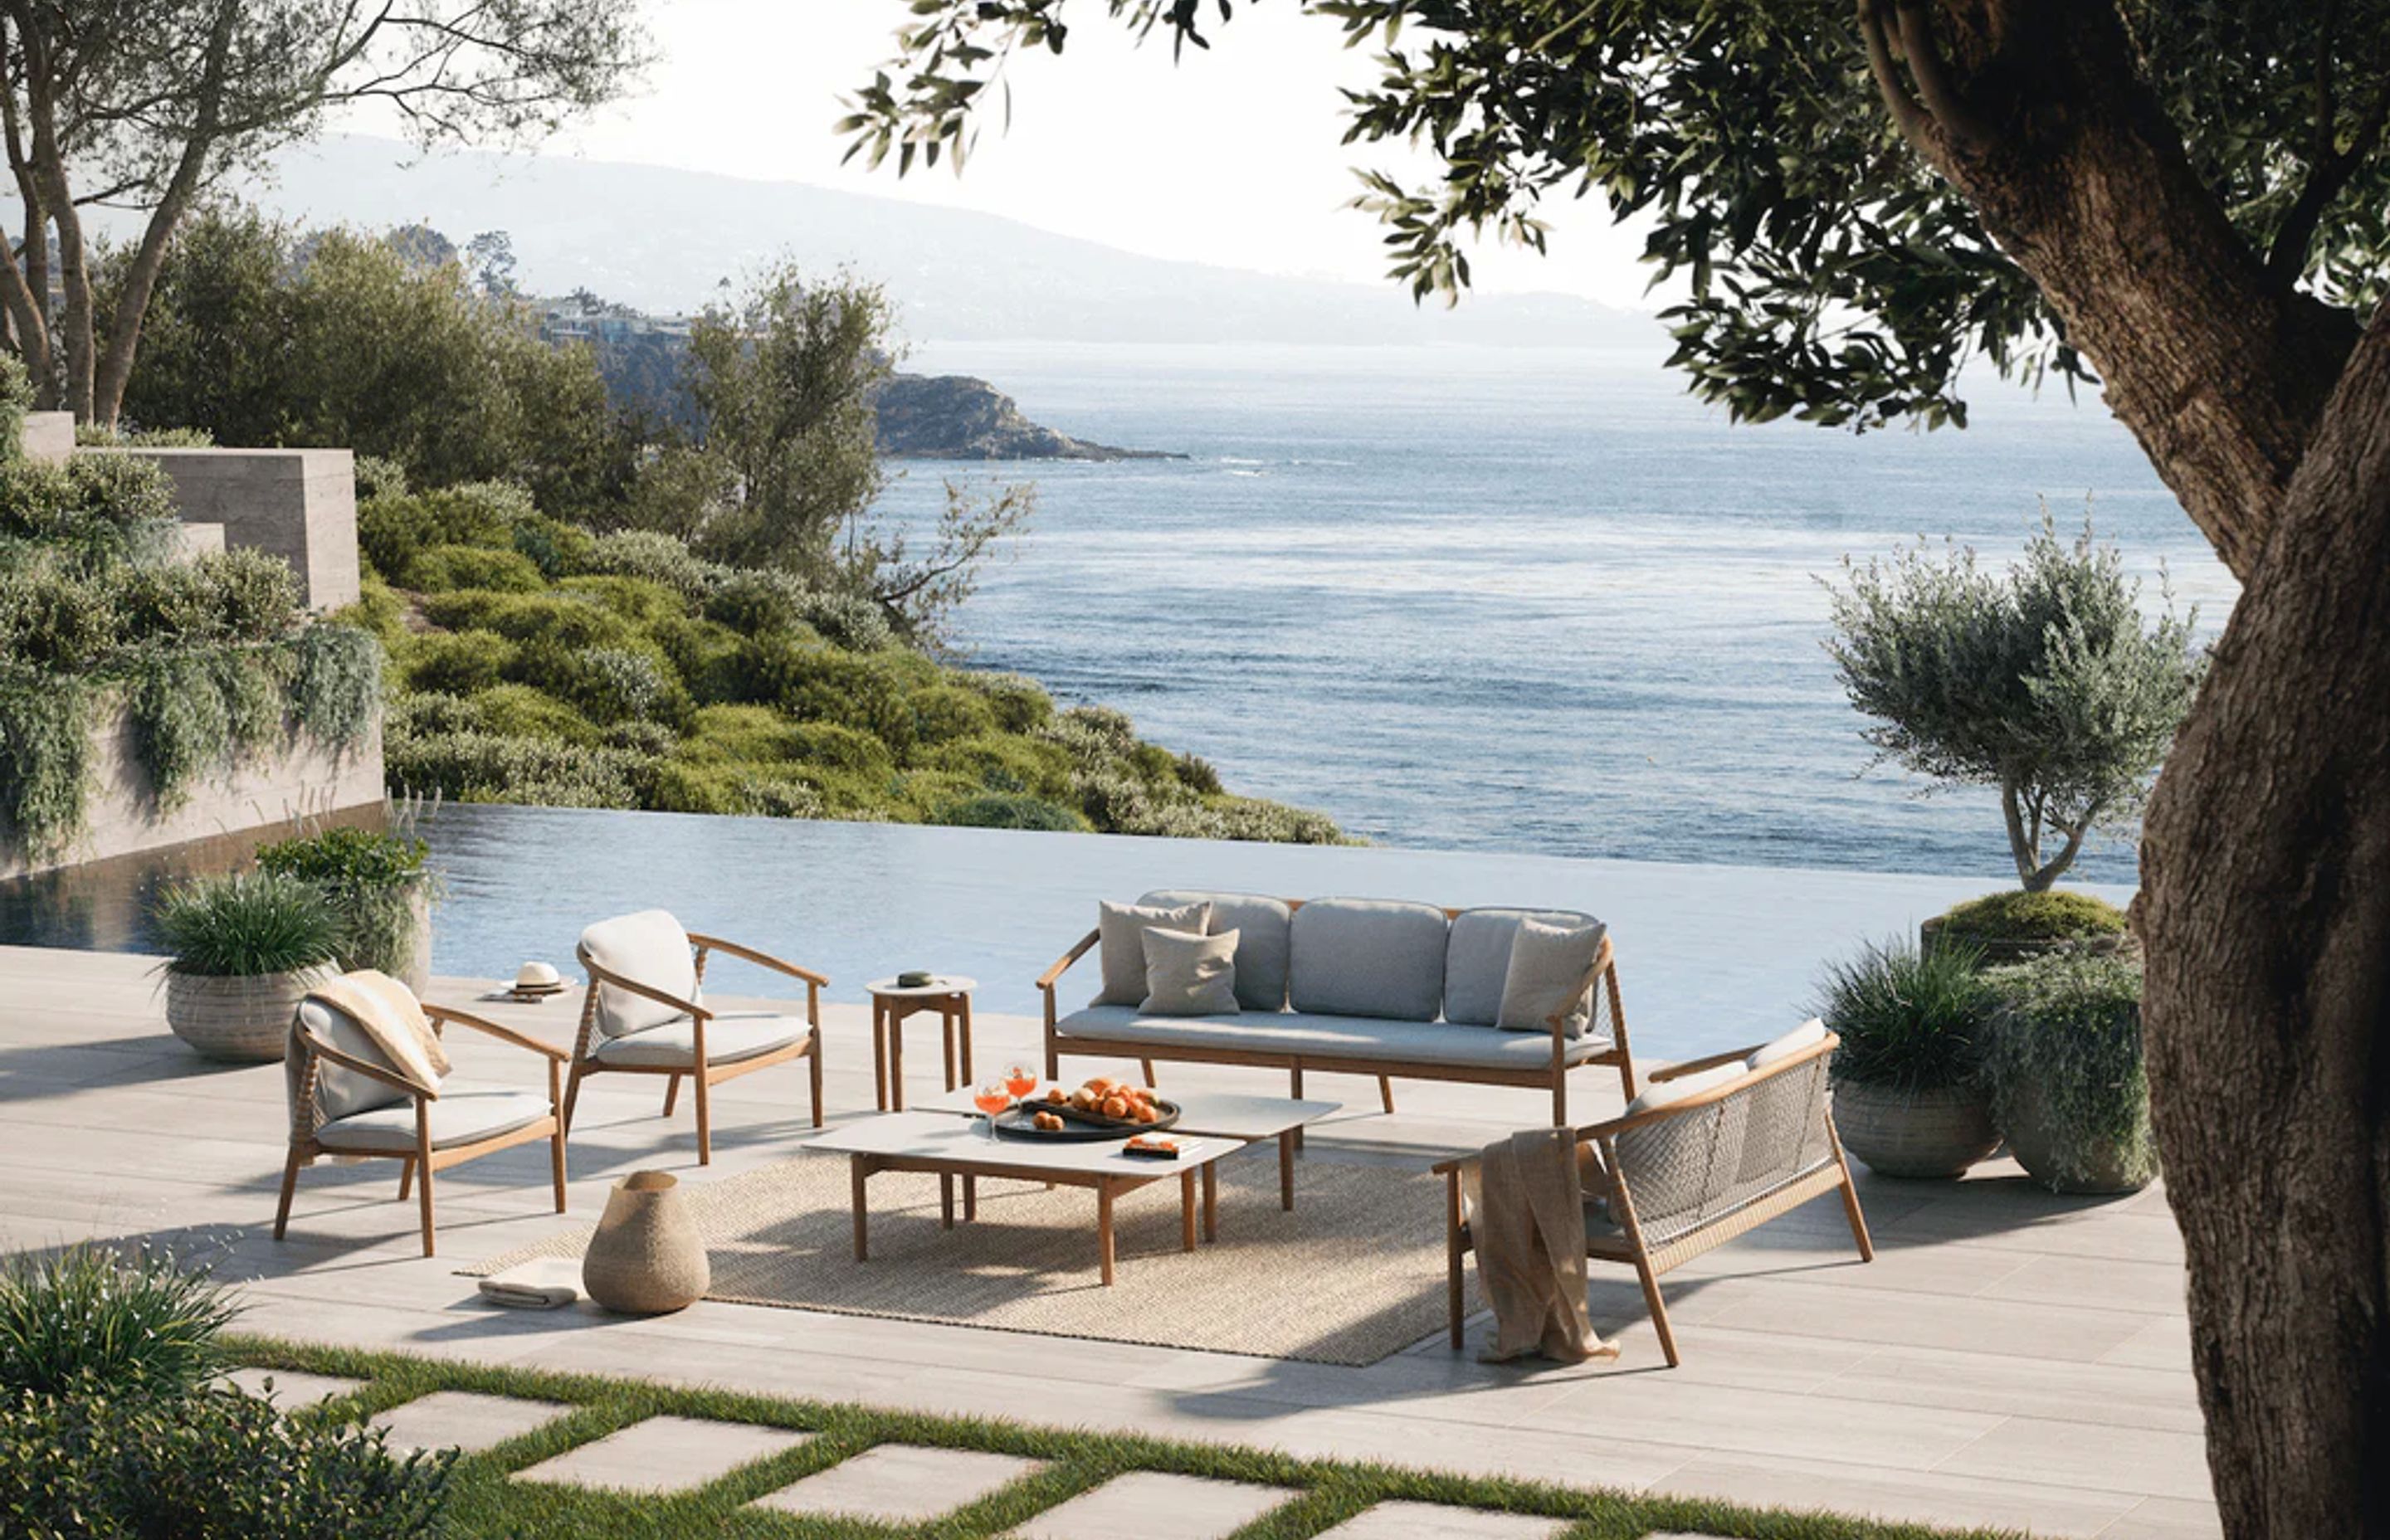 This Forrest Sofa features a teak frame and breathable weave.